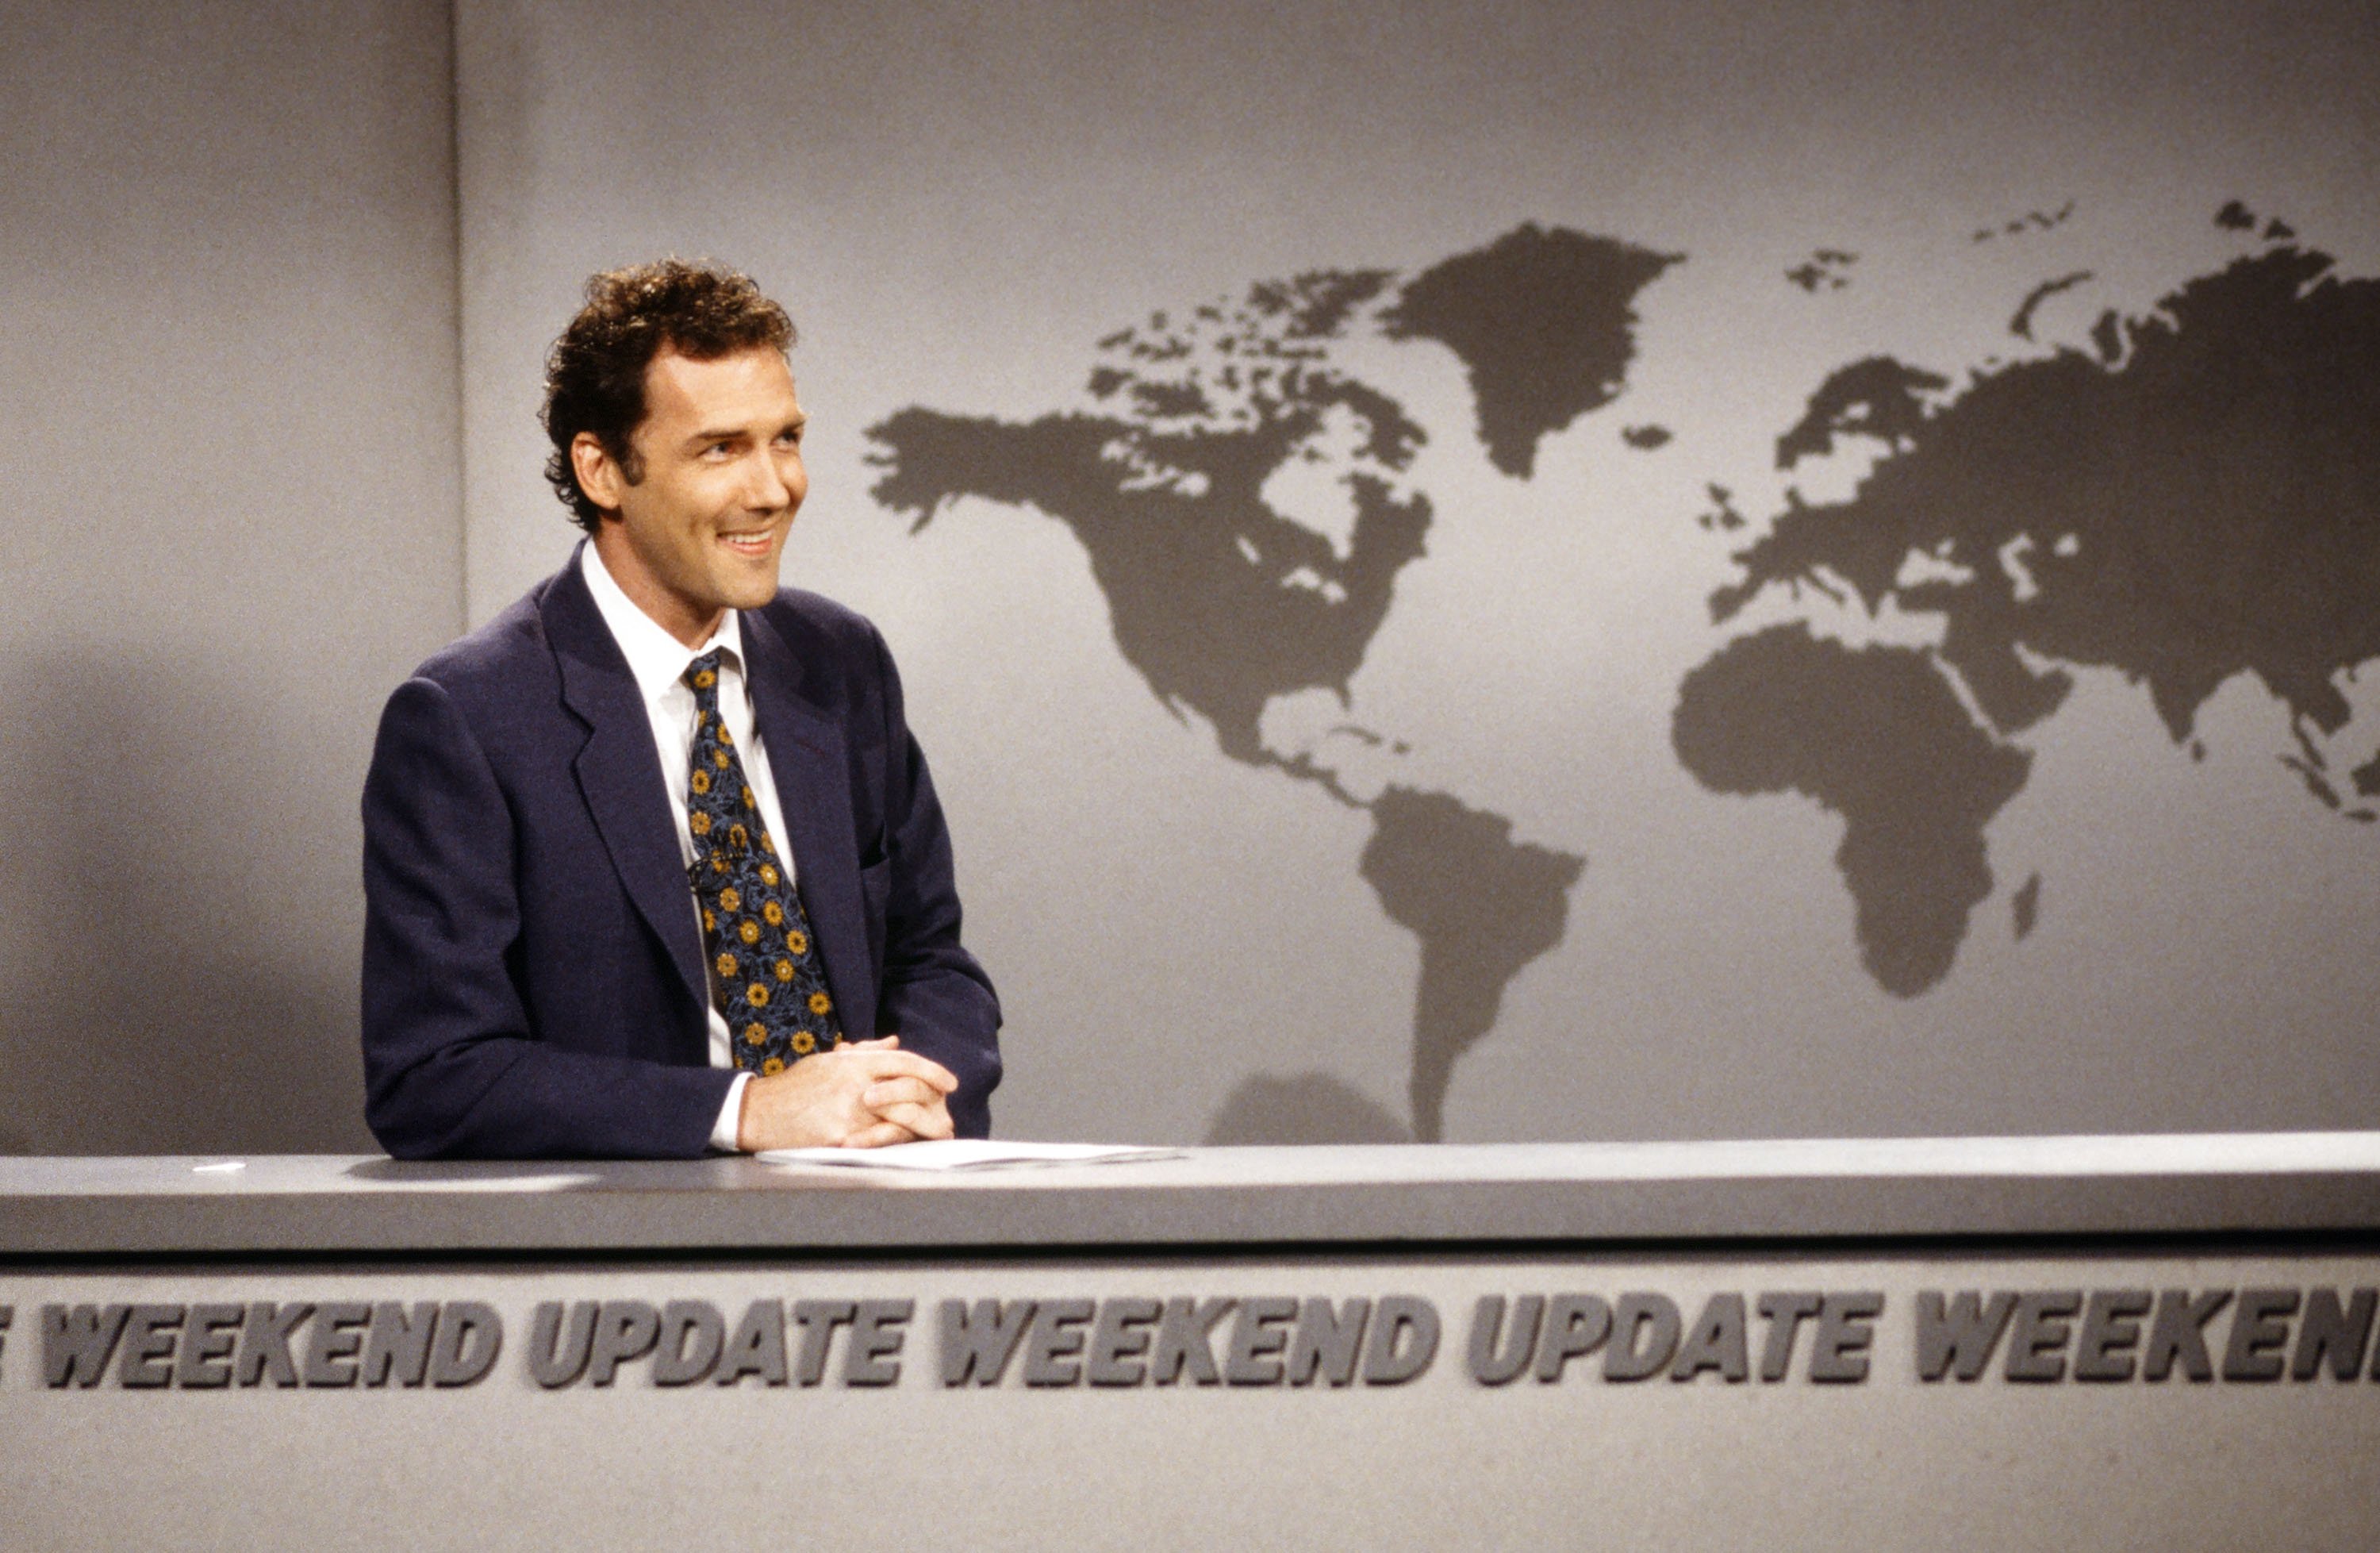 Norm MacDonald during the 'Weekend Update' skit on April 12, 1997. | Source: Getty Images